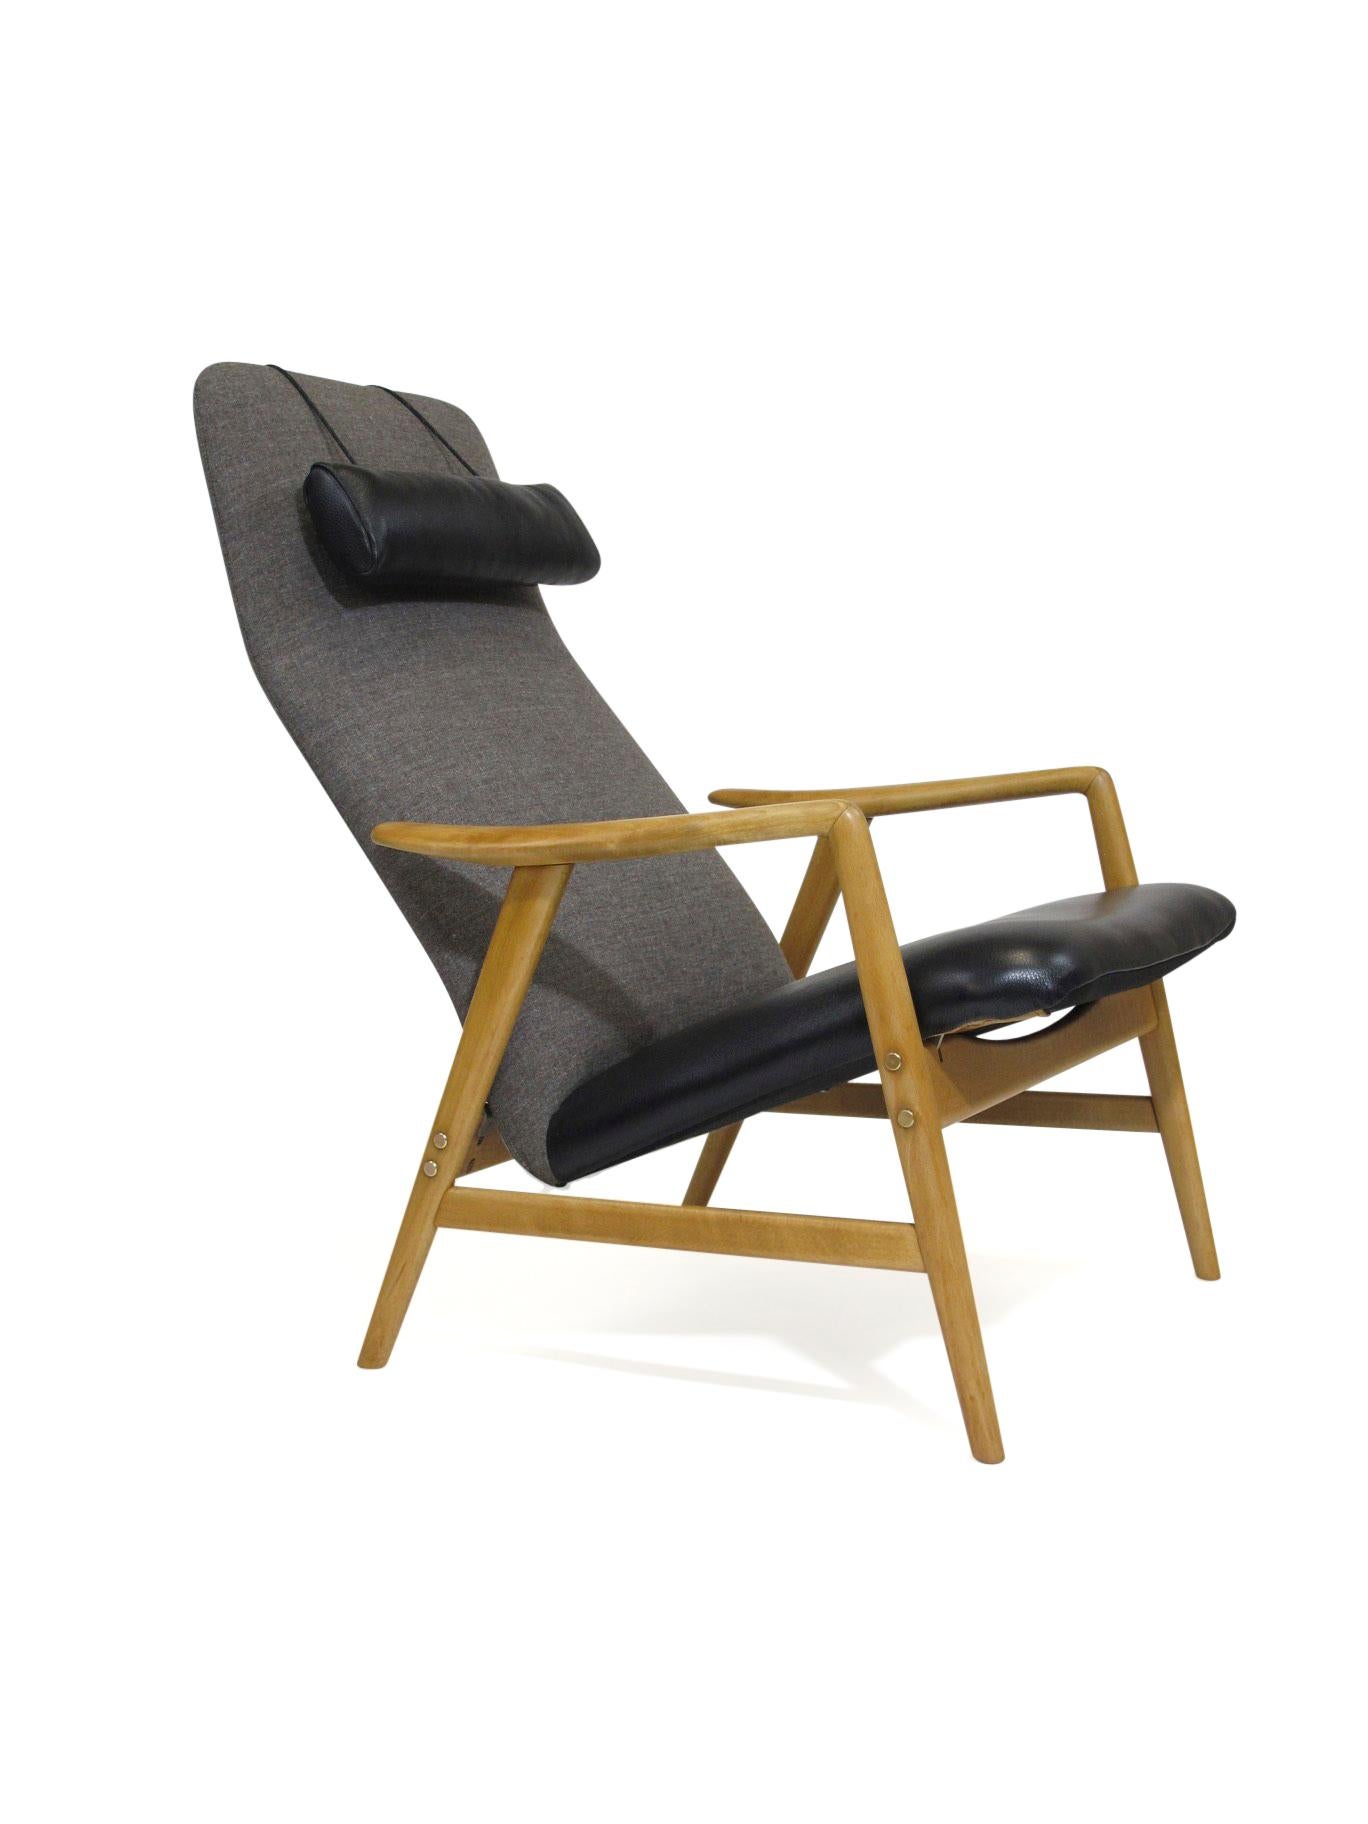 Scandinavian Modern Alf Svensson for Dux Beech Lounge Chair with Black Leather Seat